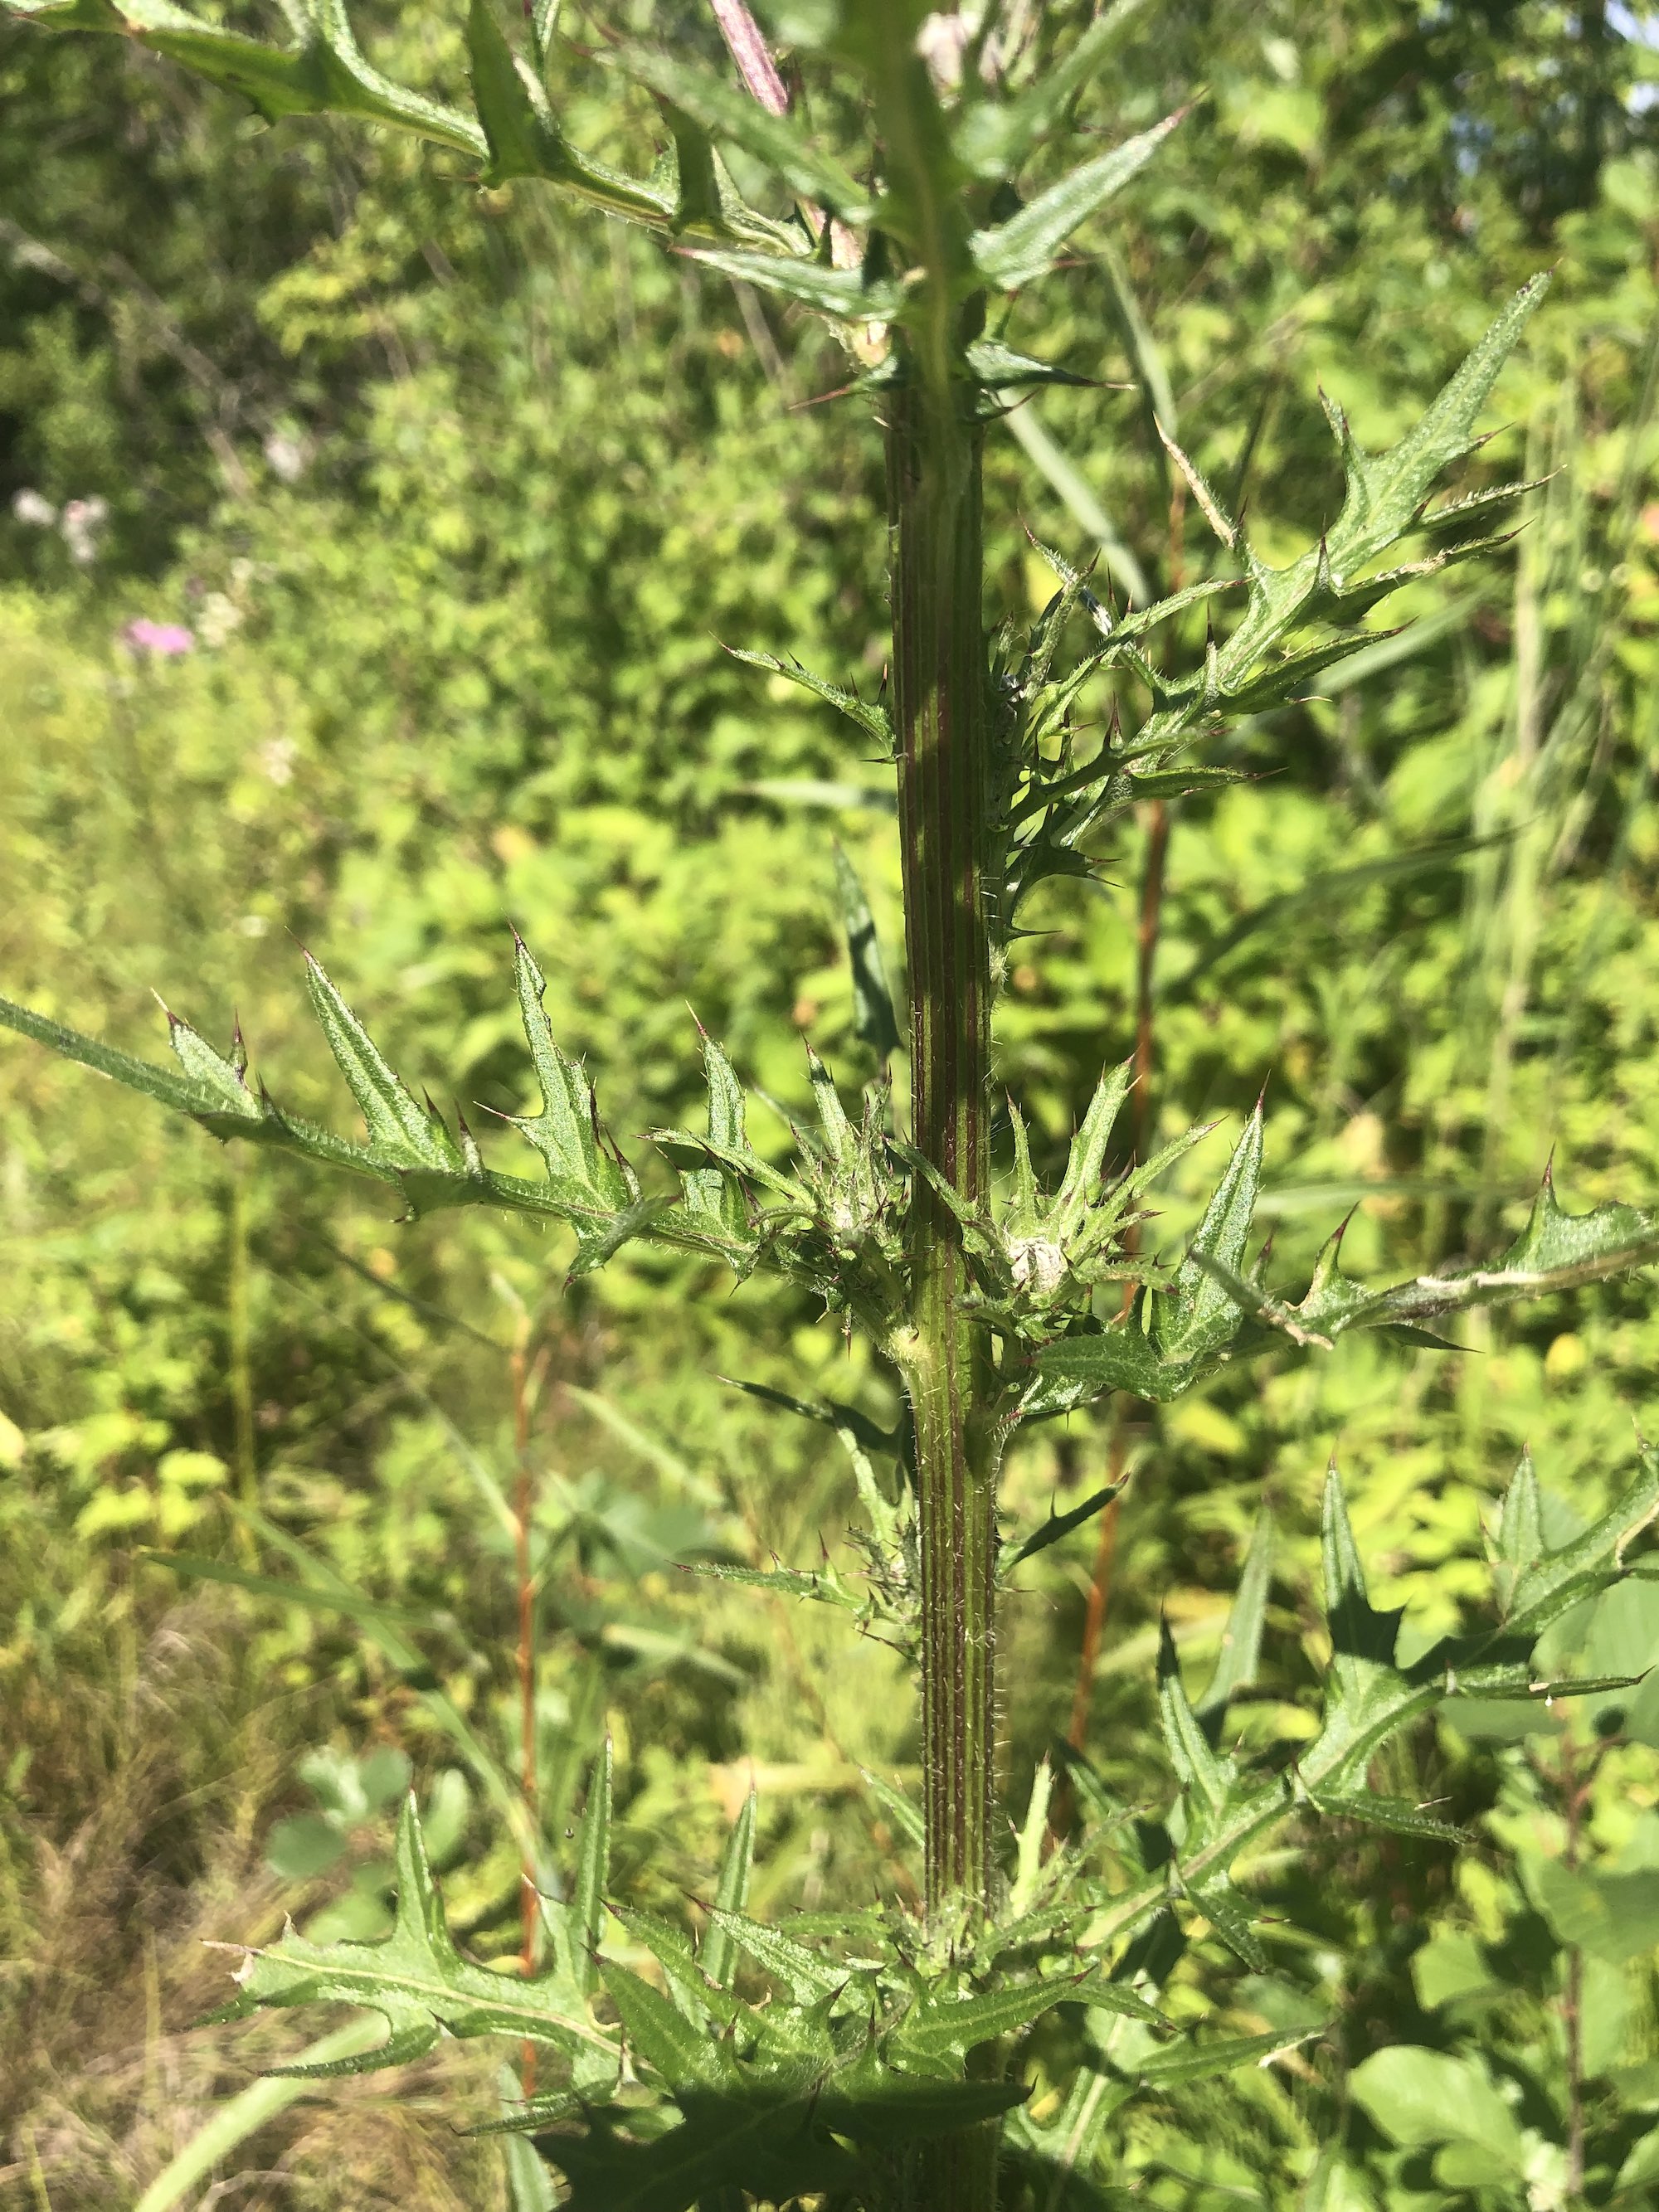 Swamp Thistle near cattails along shore of Lake Wingra along Arboretum Drive in Madison, Wisconsin on August 17, 2022.